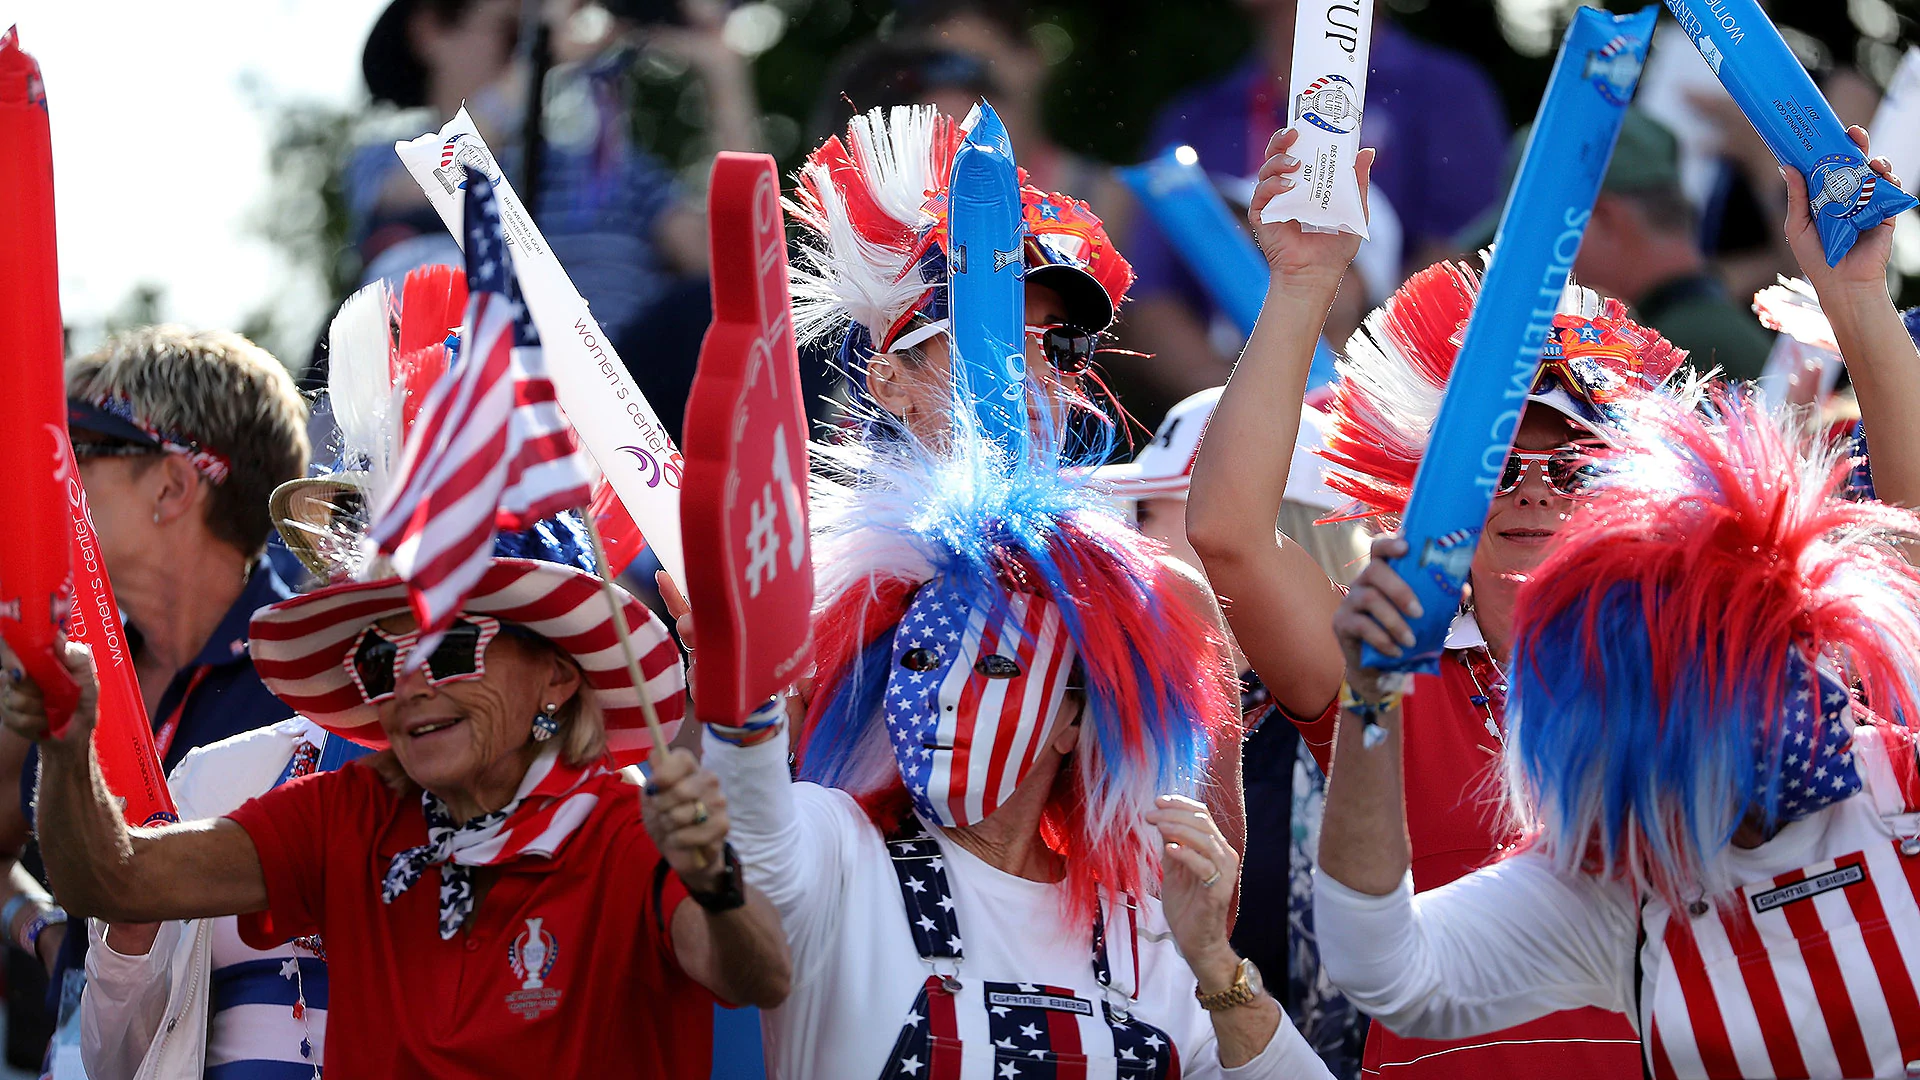 Solheim Cup sets new event attendance record